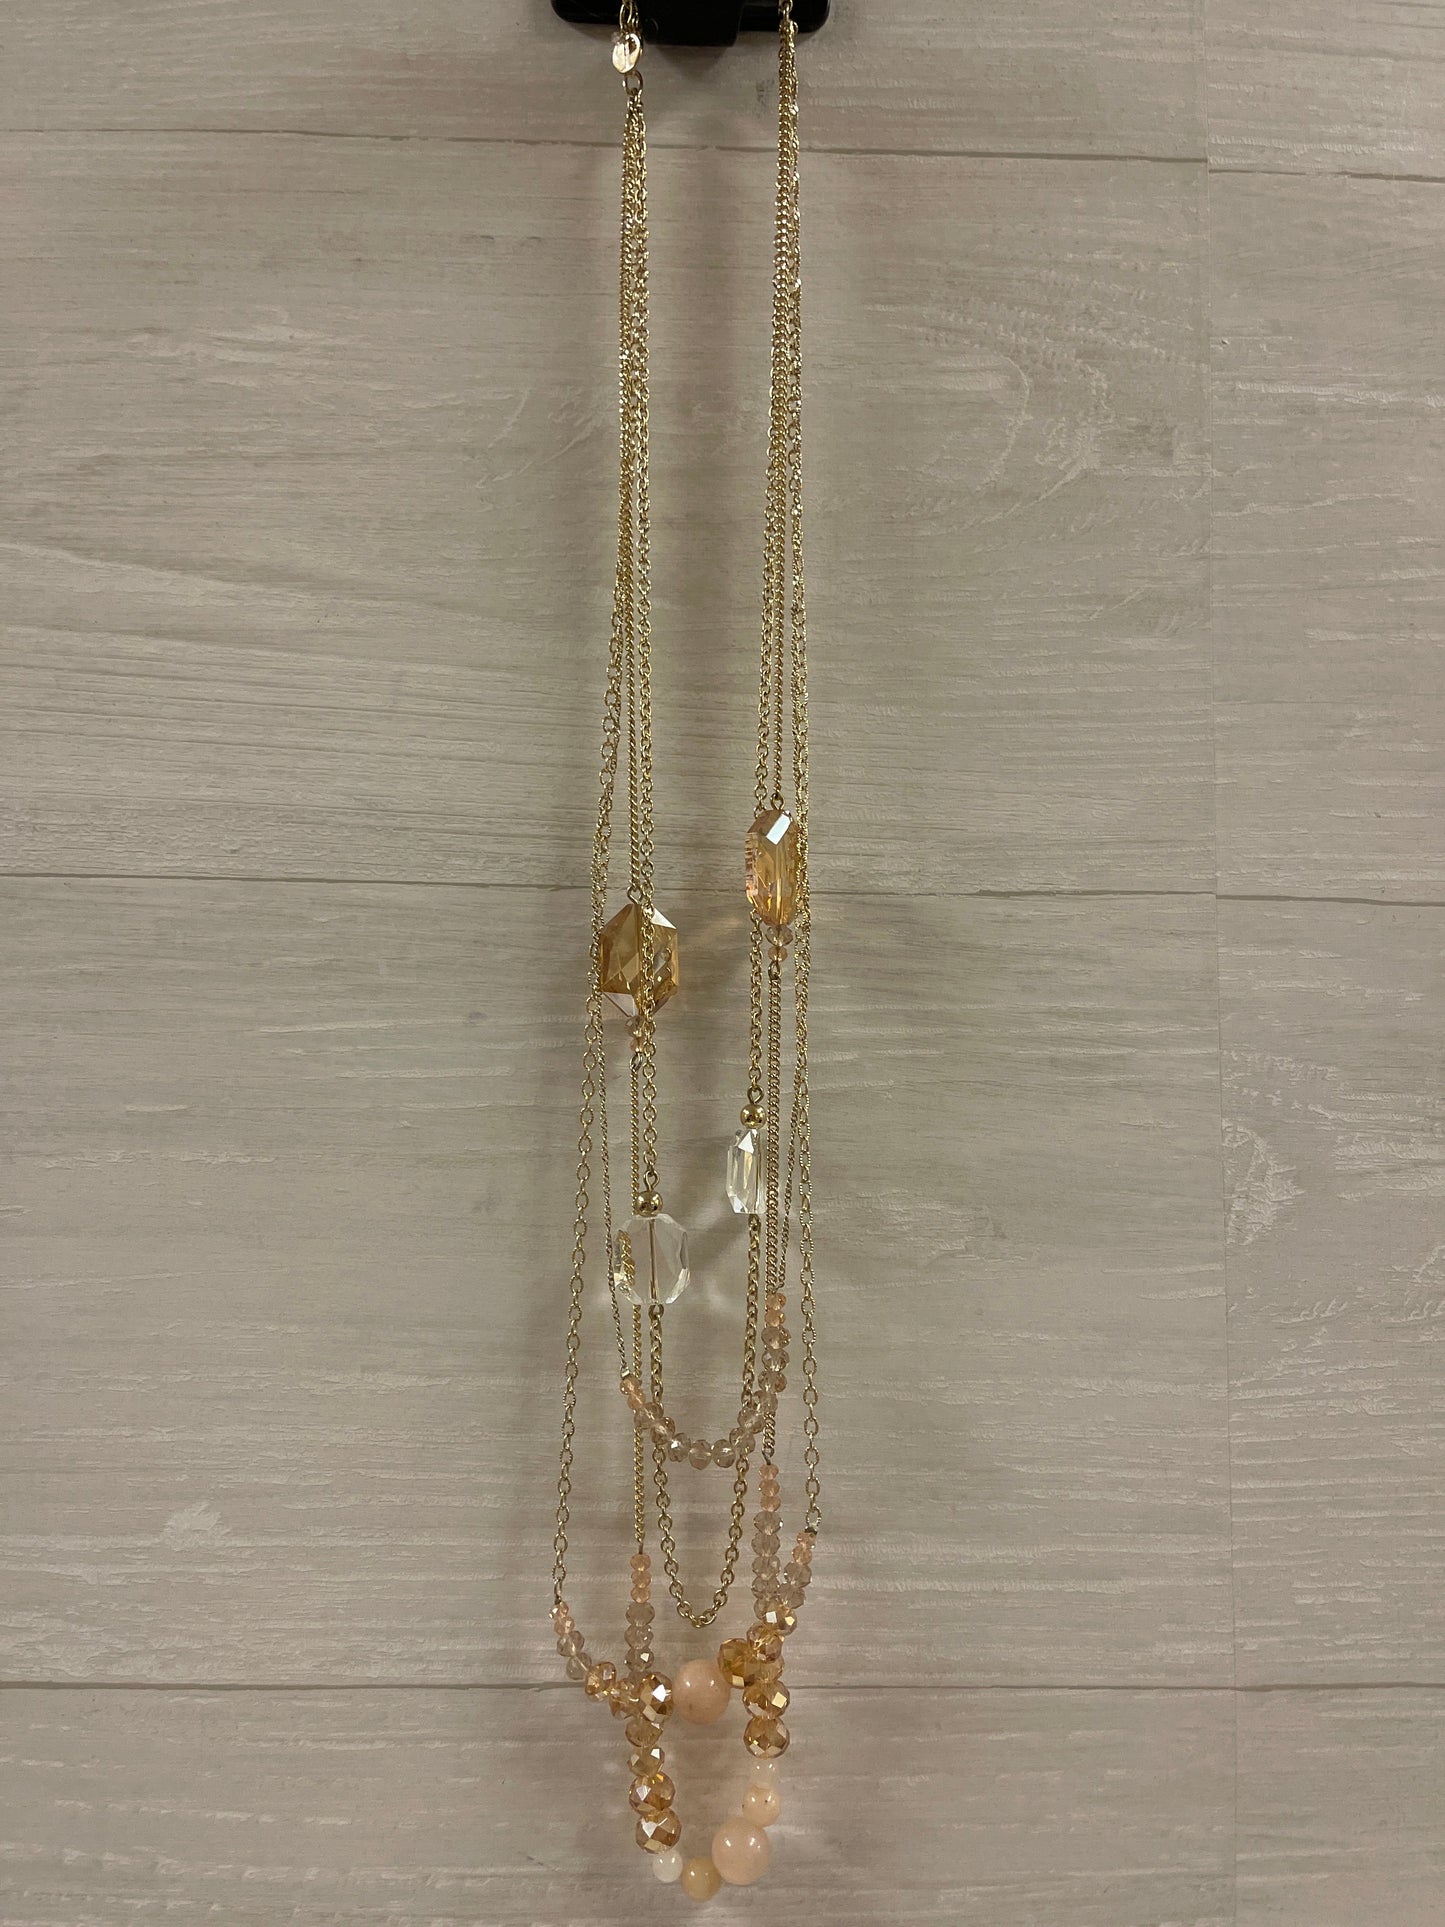 Necklace Layered By Talbots